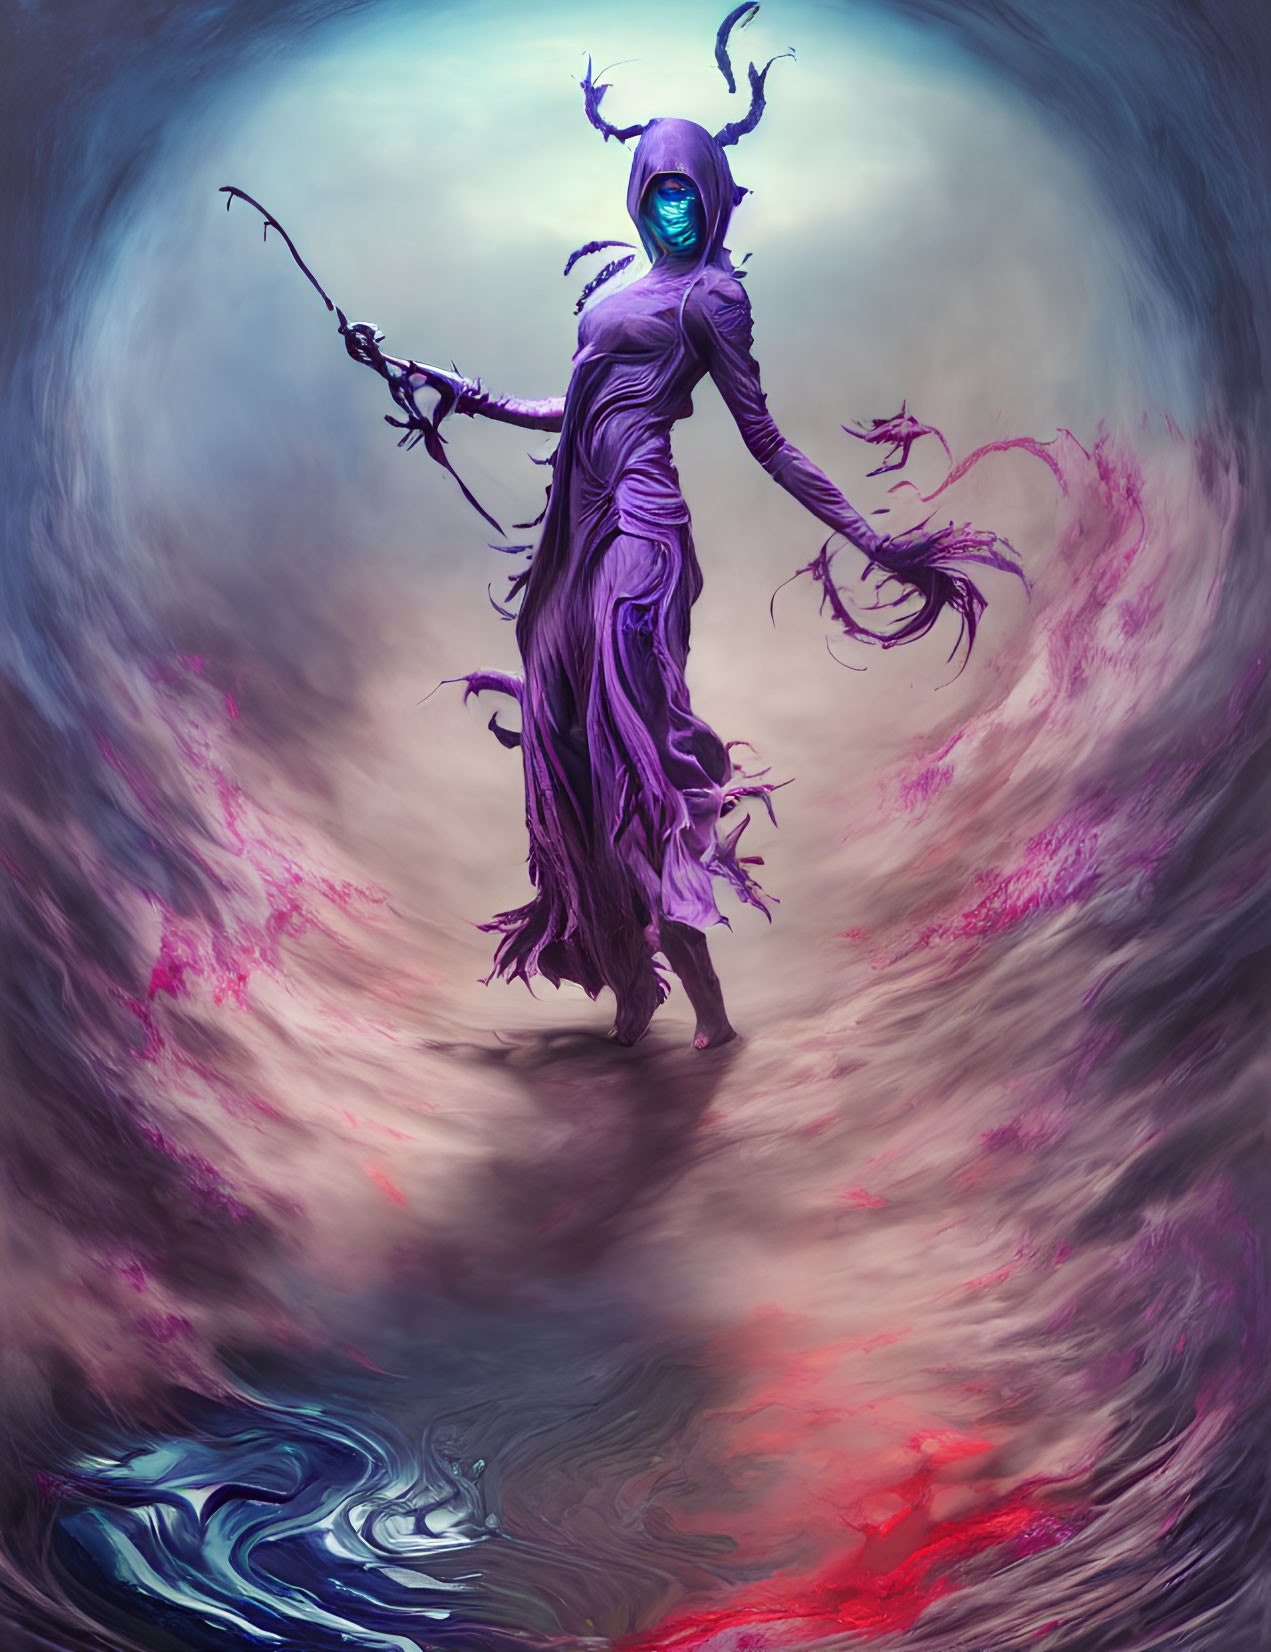 Blue glowing face mystical figure levitating in purple robes amidst swirling magenta and indigo vortex.